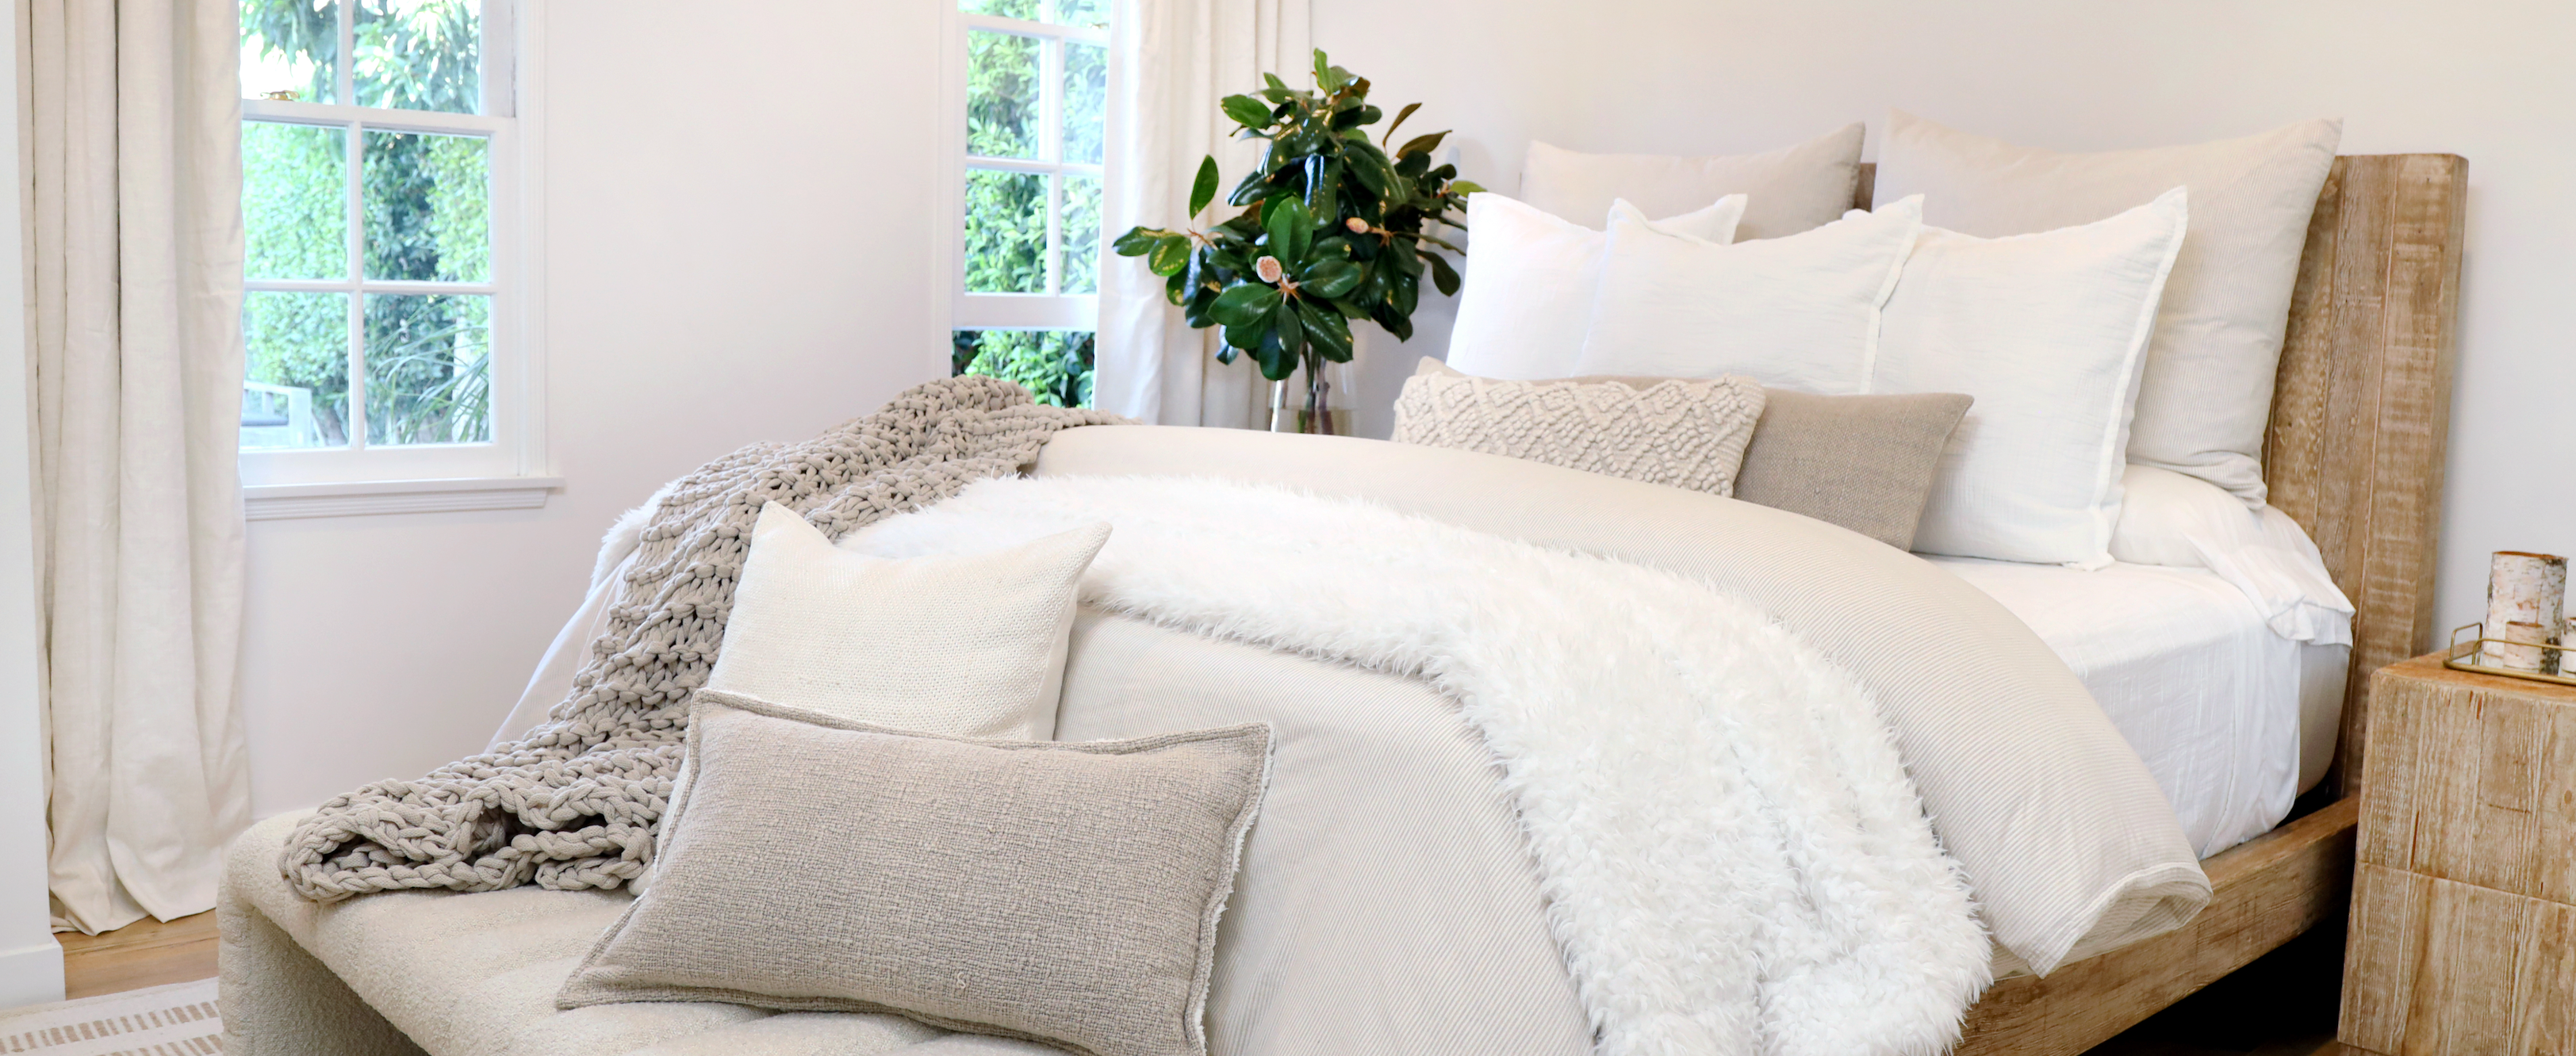 A Winter White Bedroom